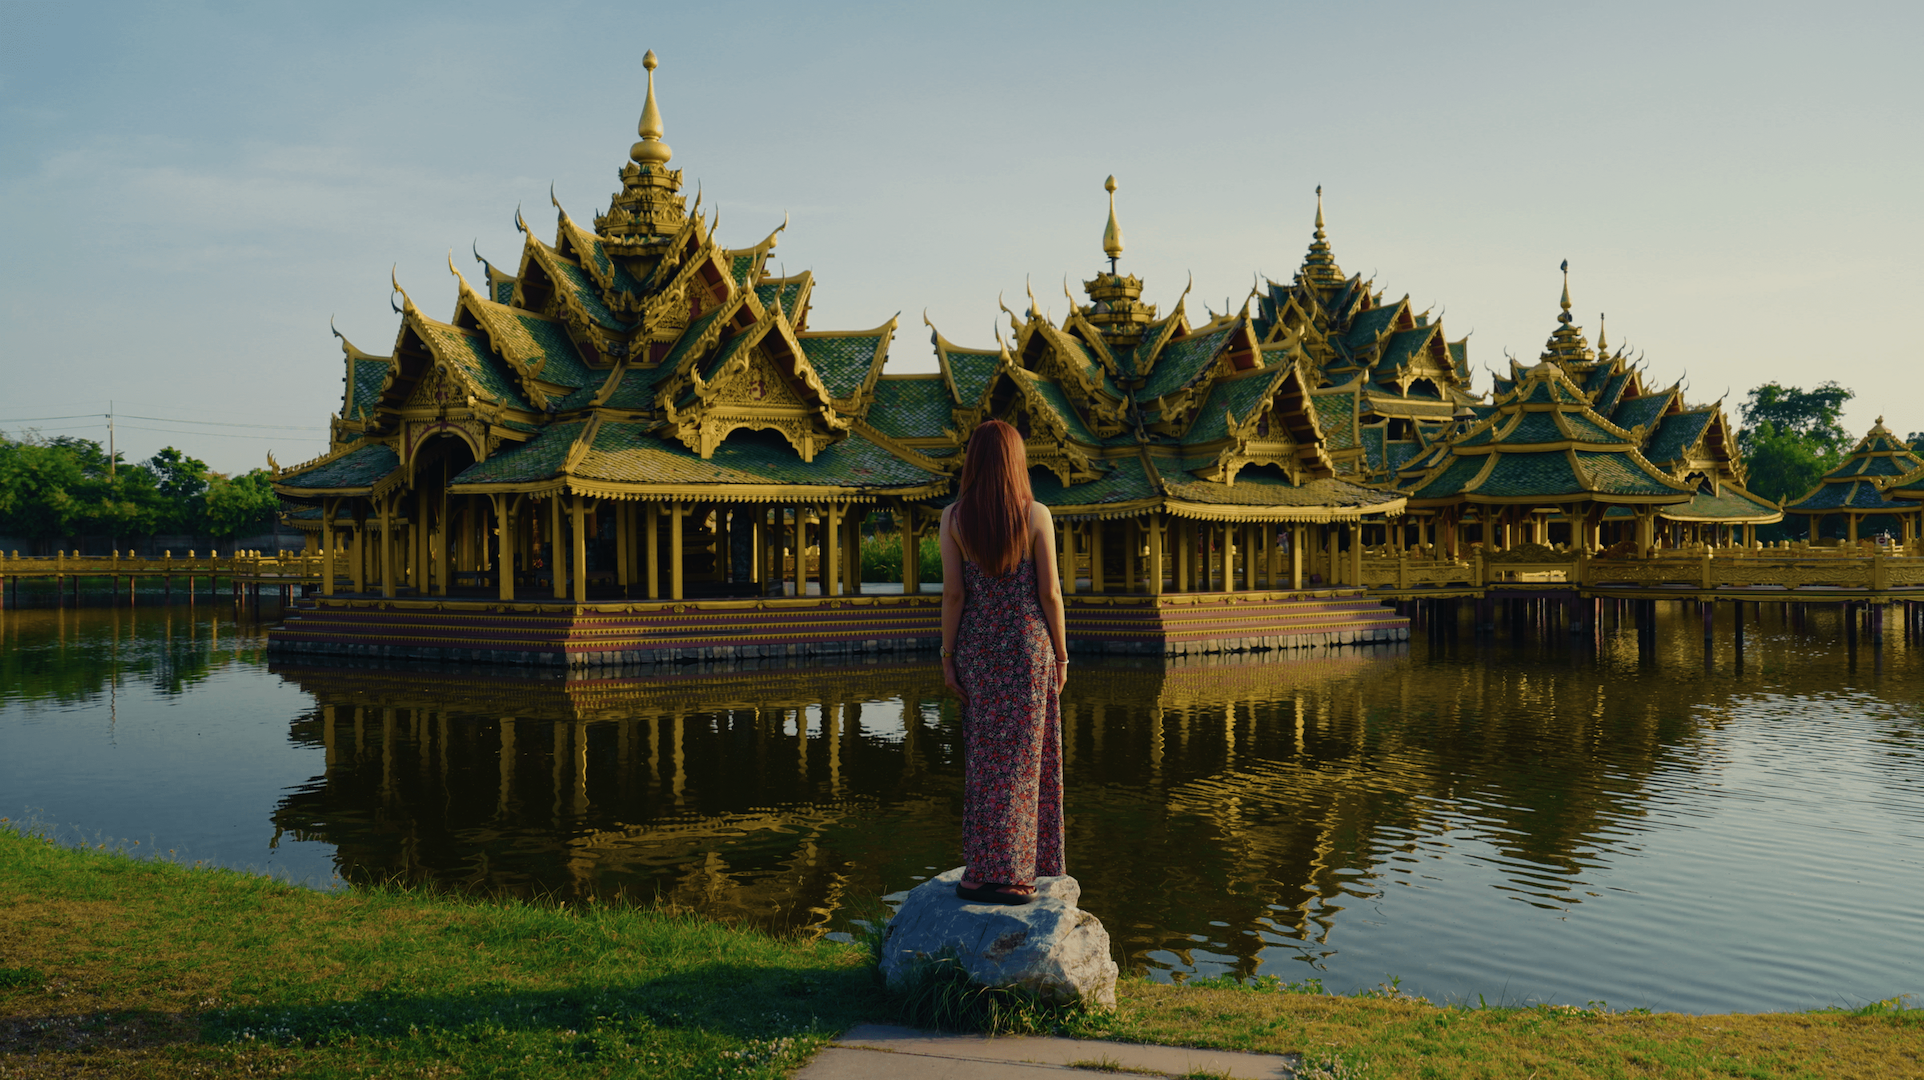 Woman in a long floral dress standing in front of a large Thai pavilion, with her back to the camera